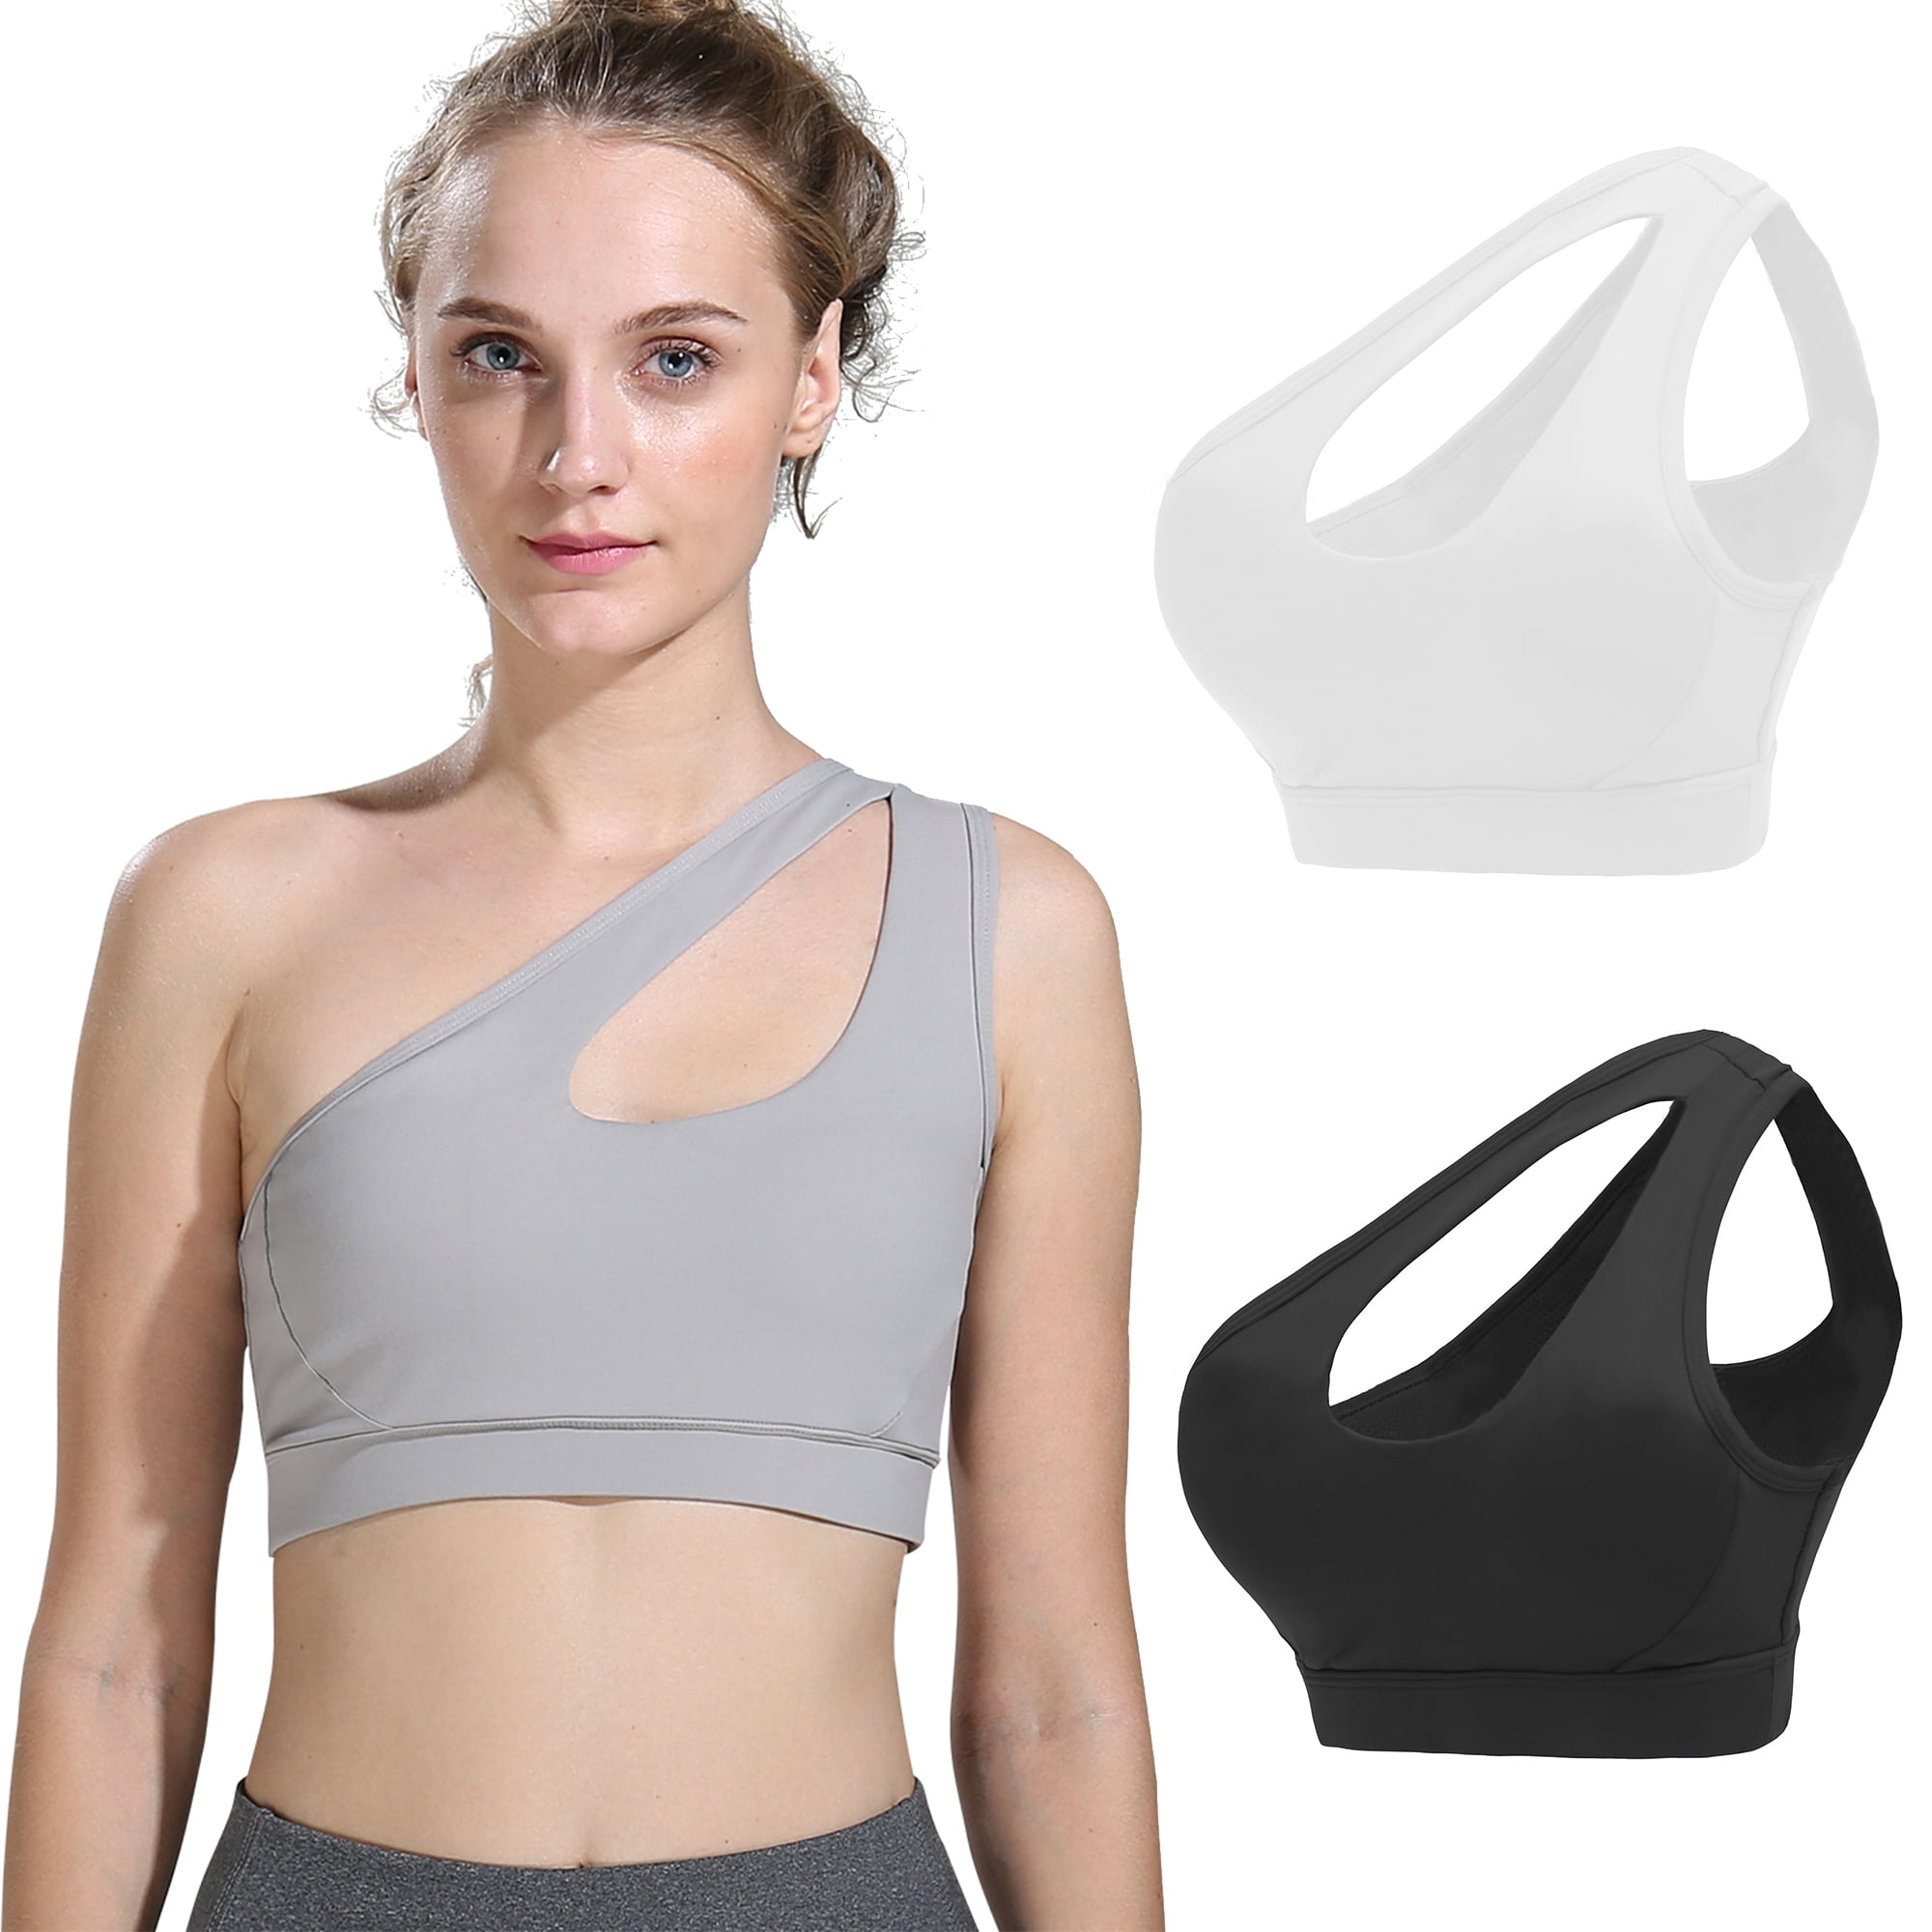 Elbourn 4 Pack Plus Size Sport Bras Padded Strappy Cropped Bras for Yoga  Workout Fitness Low Impact Comfy Padded Gym Yoga Tops 